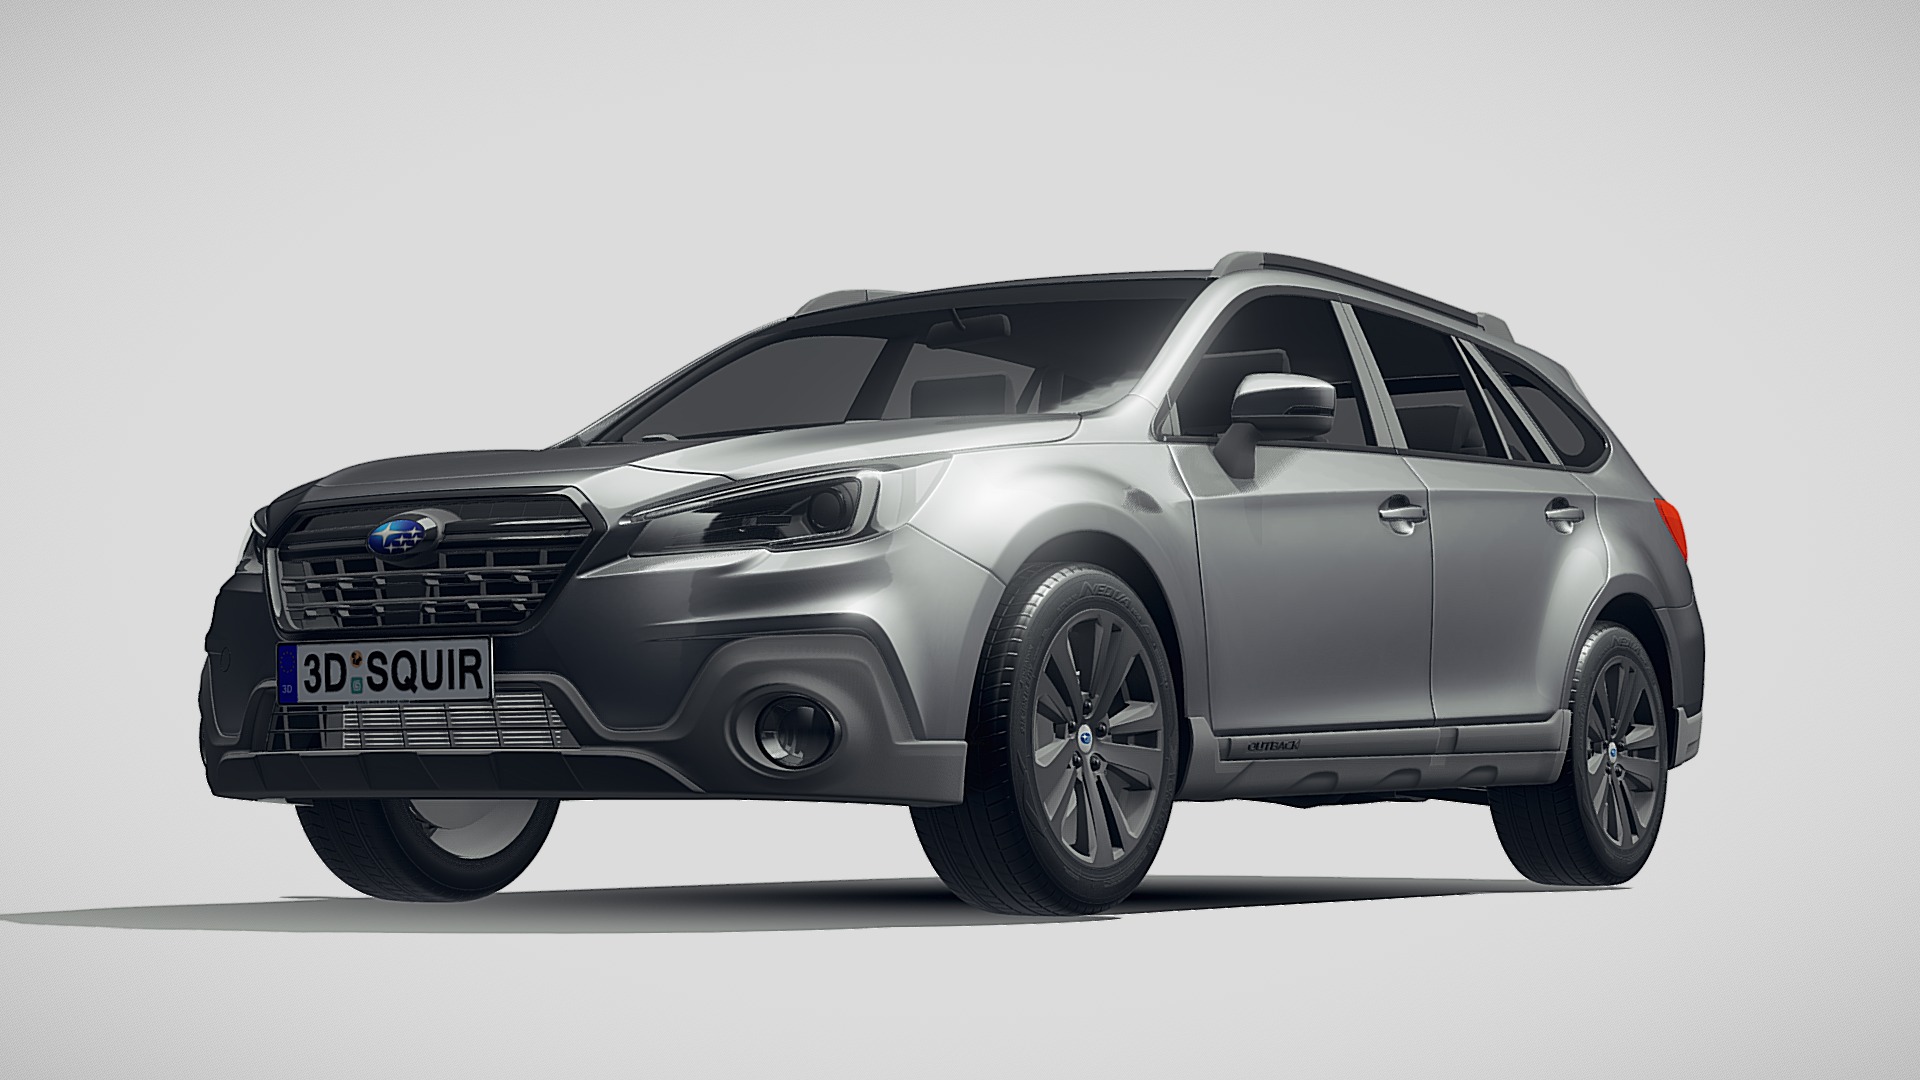 3D model Subaru Outback EU 2019 - This is a 3D model of the Subaru Outback EU 2019. The 3D model is about a silver car with a black background with Holden Arboretum in the background.